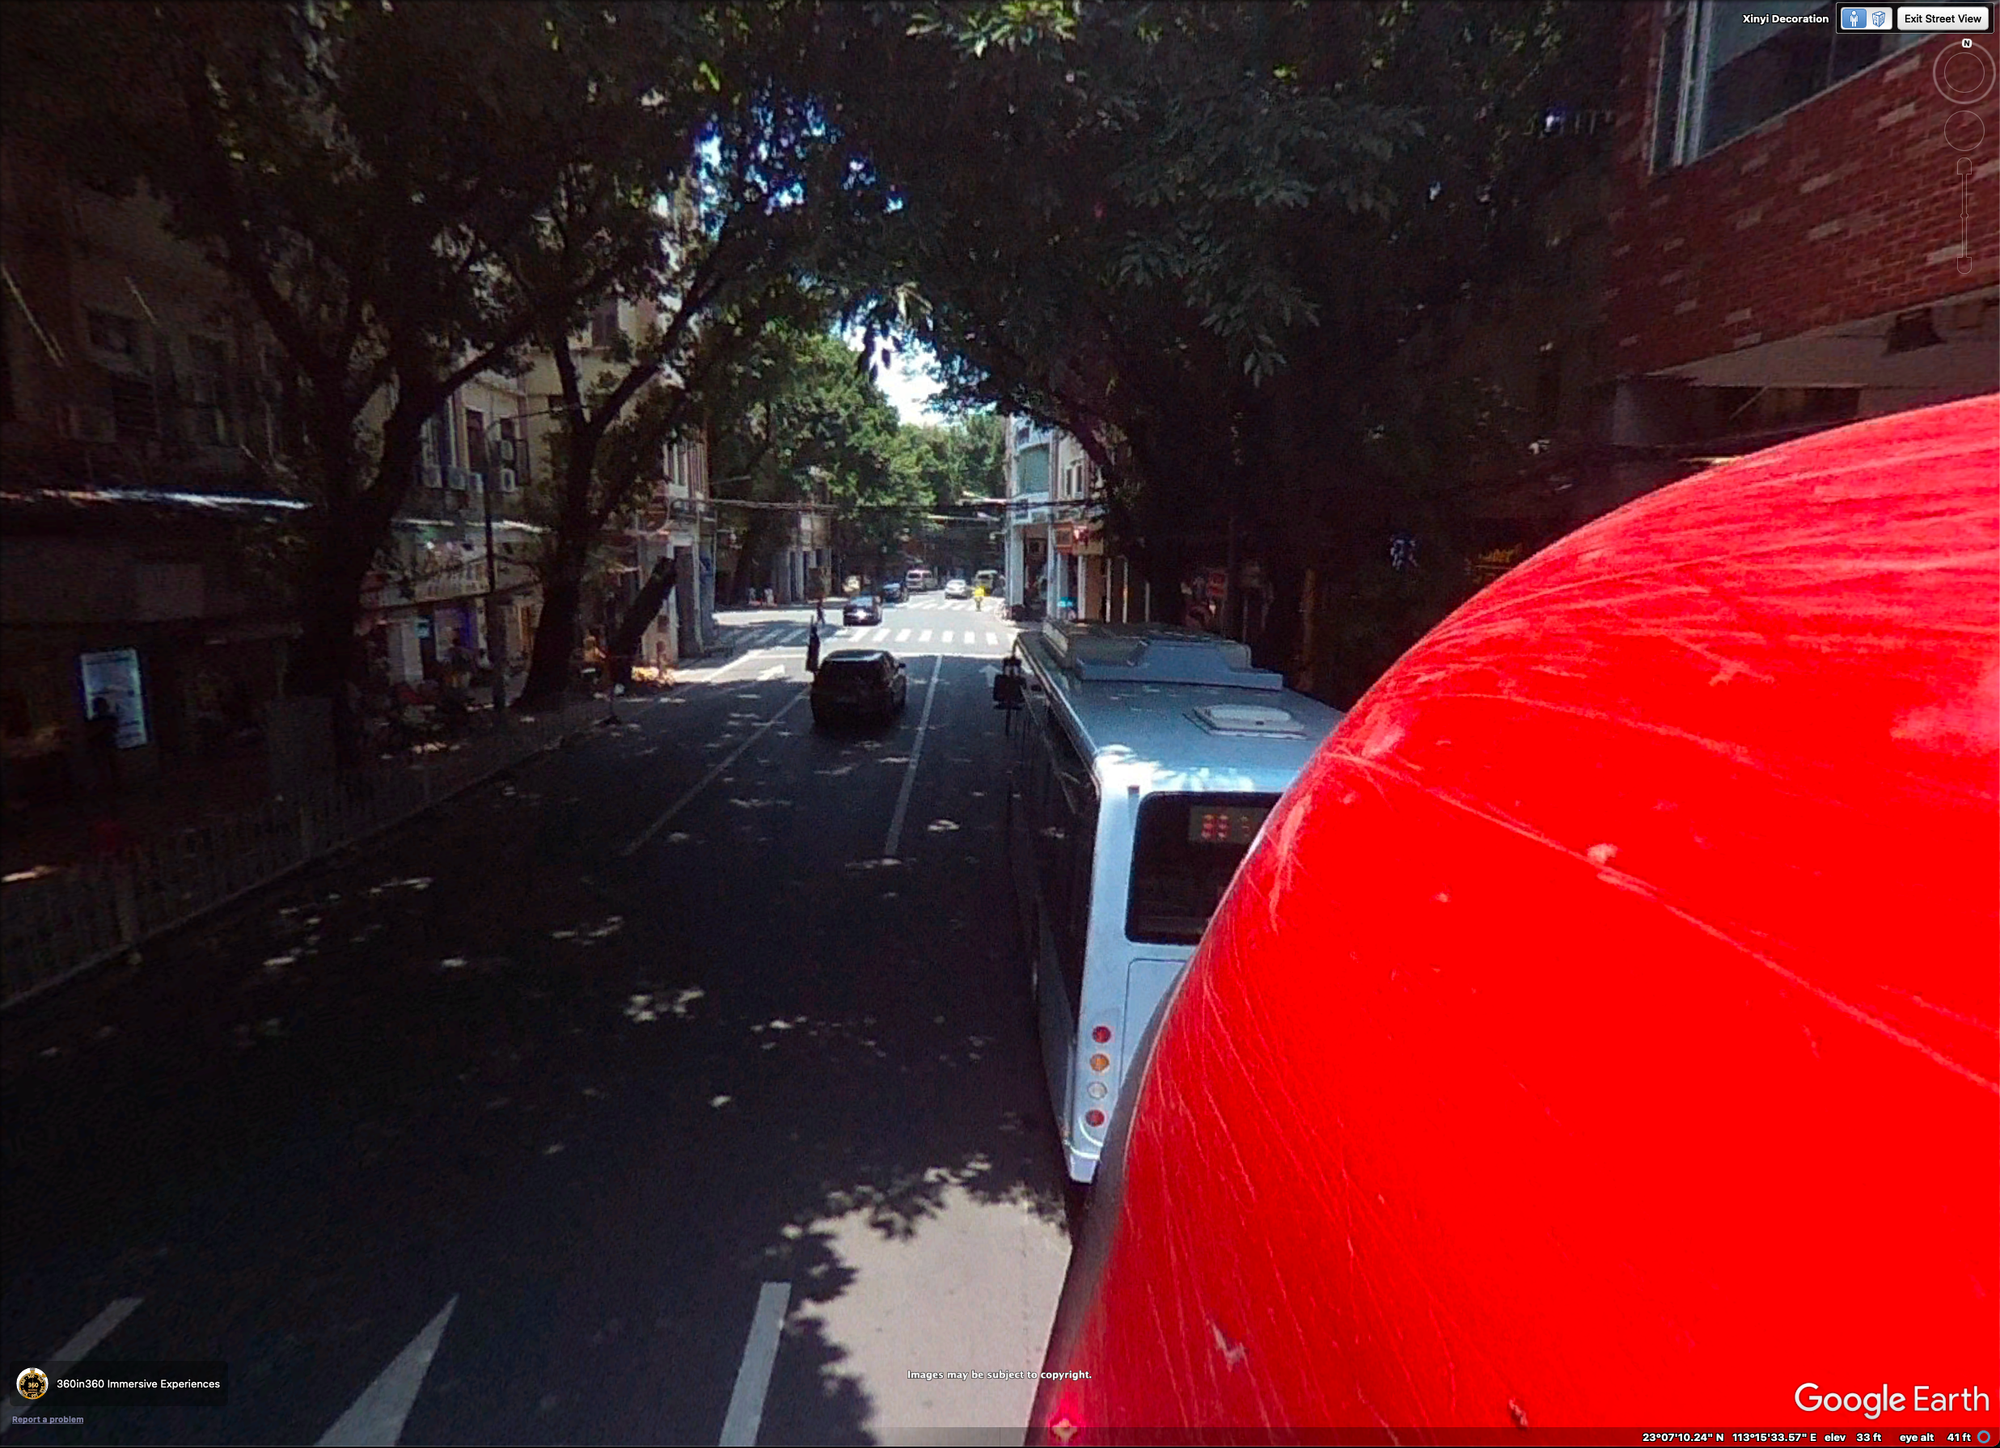 Google Earth photosphere screenshot, showing shaded road in china. Camera is next to bright red bus, white bus visible ahead of it in traffic. one way street.